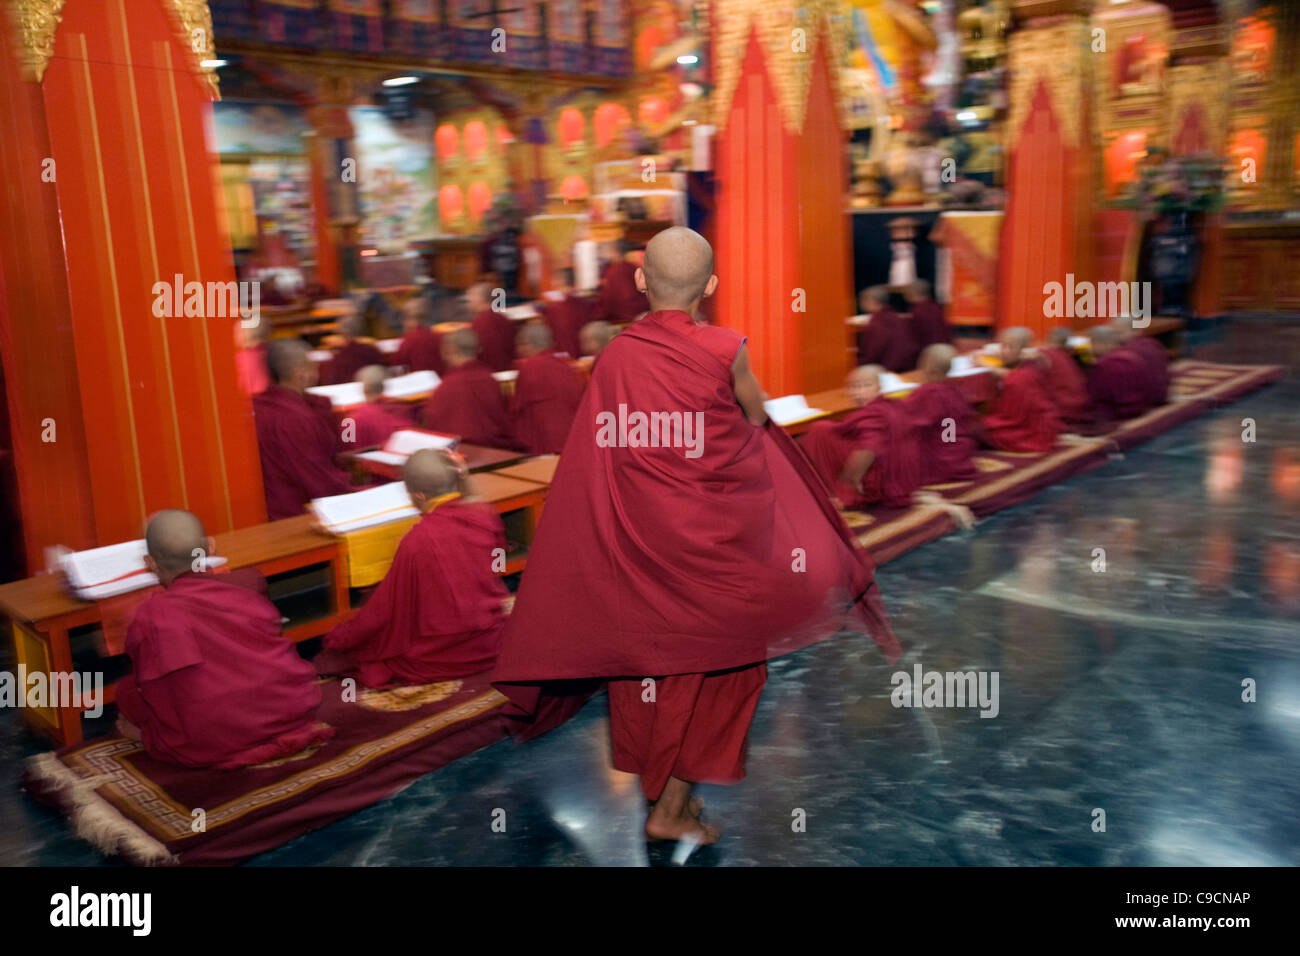 Buddhist monks reading and chanting sutras at the Vajra Vidya Institute for Buddhist studies in Sarnath, India Stock Photo